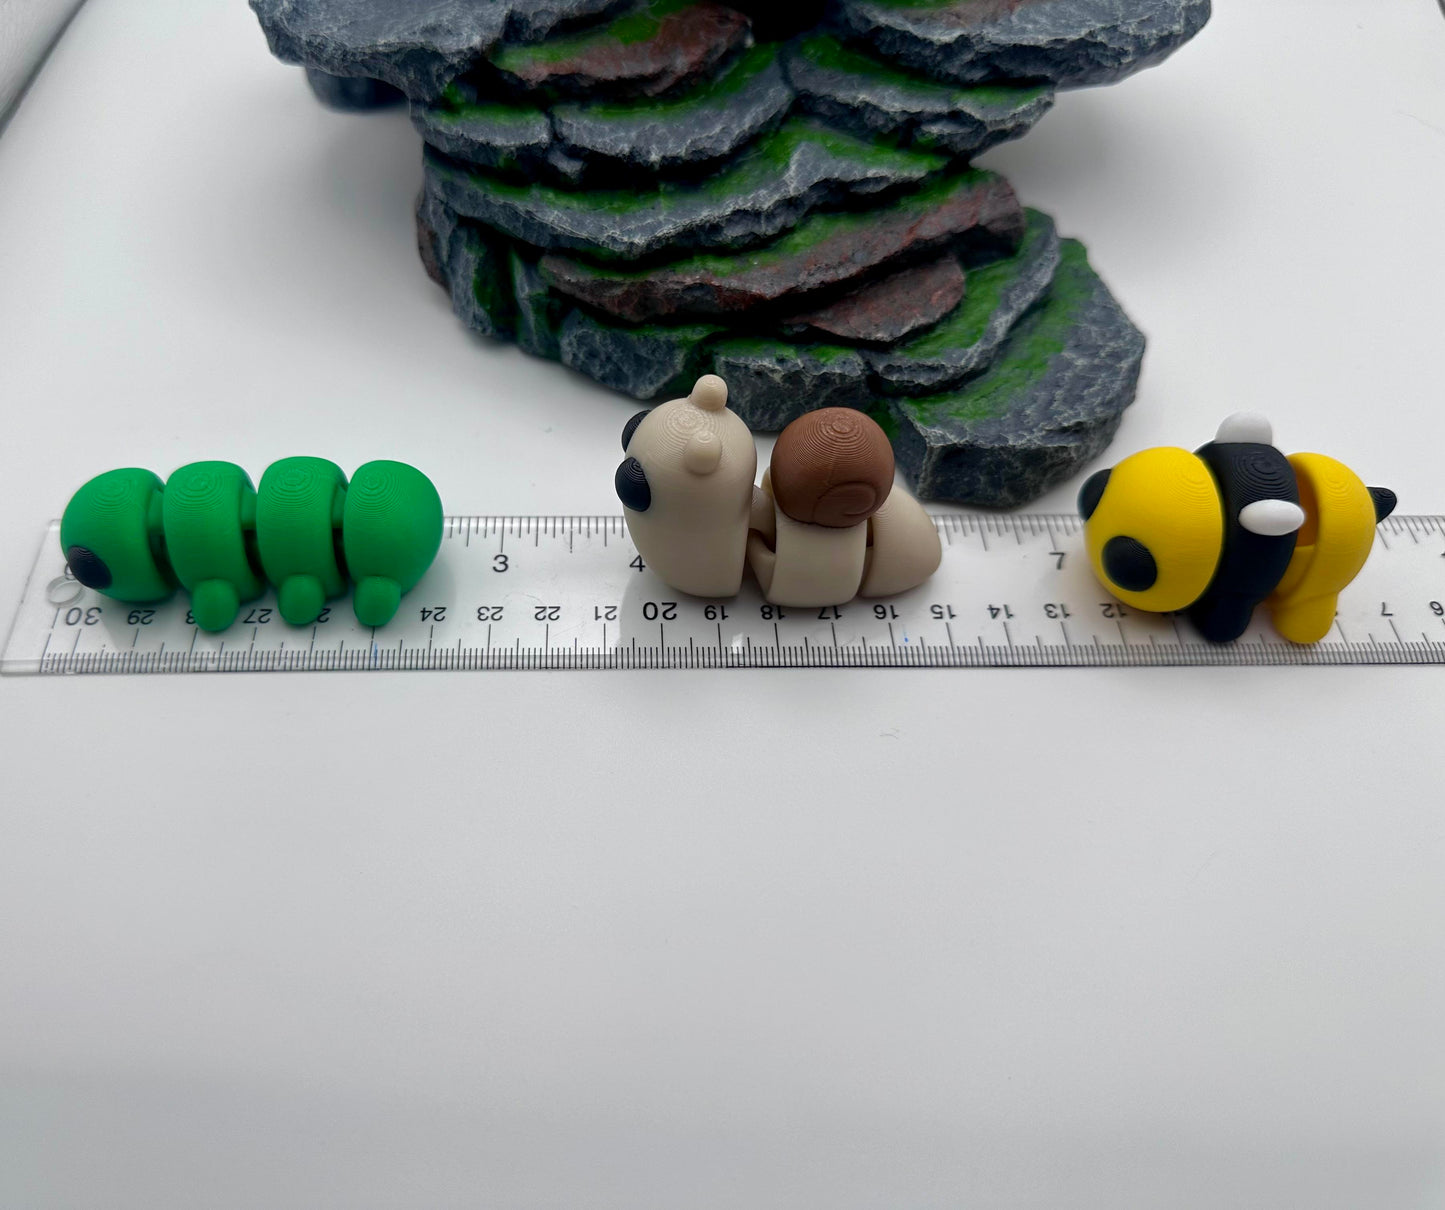 3D Printed Articulating Forest Creature Trio Set with Snail, Caterpillar, and Bee